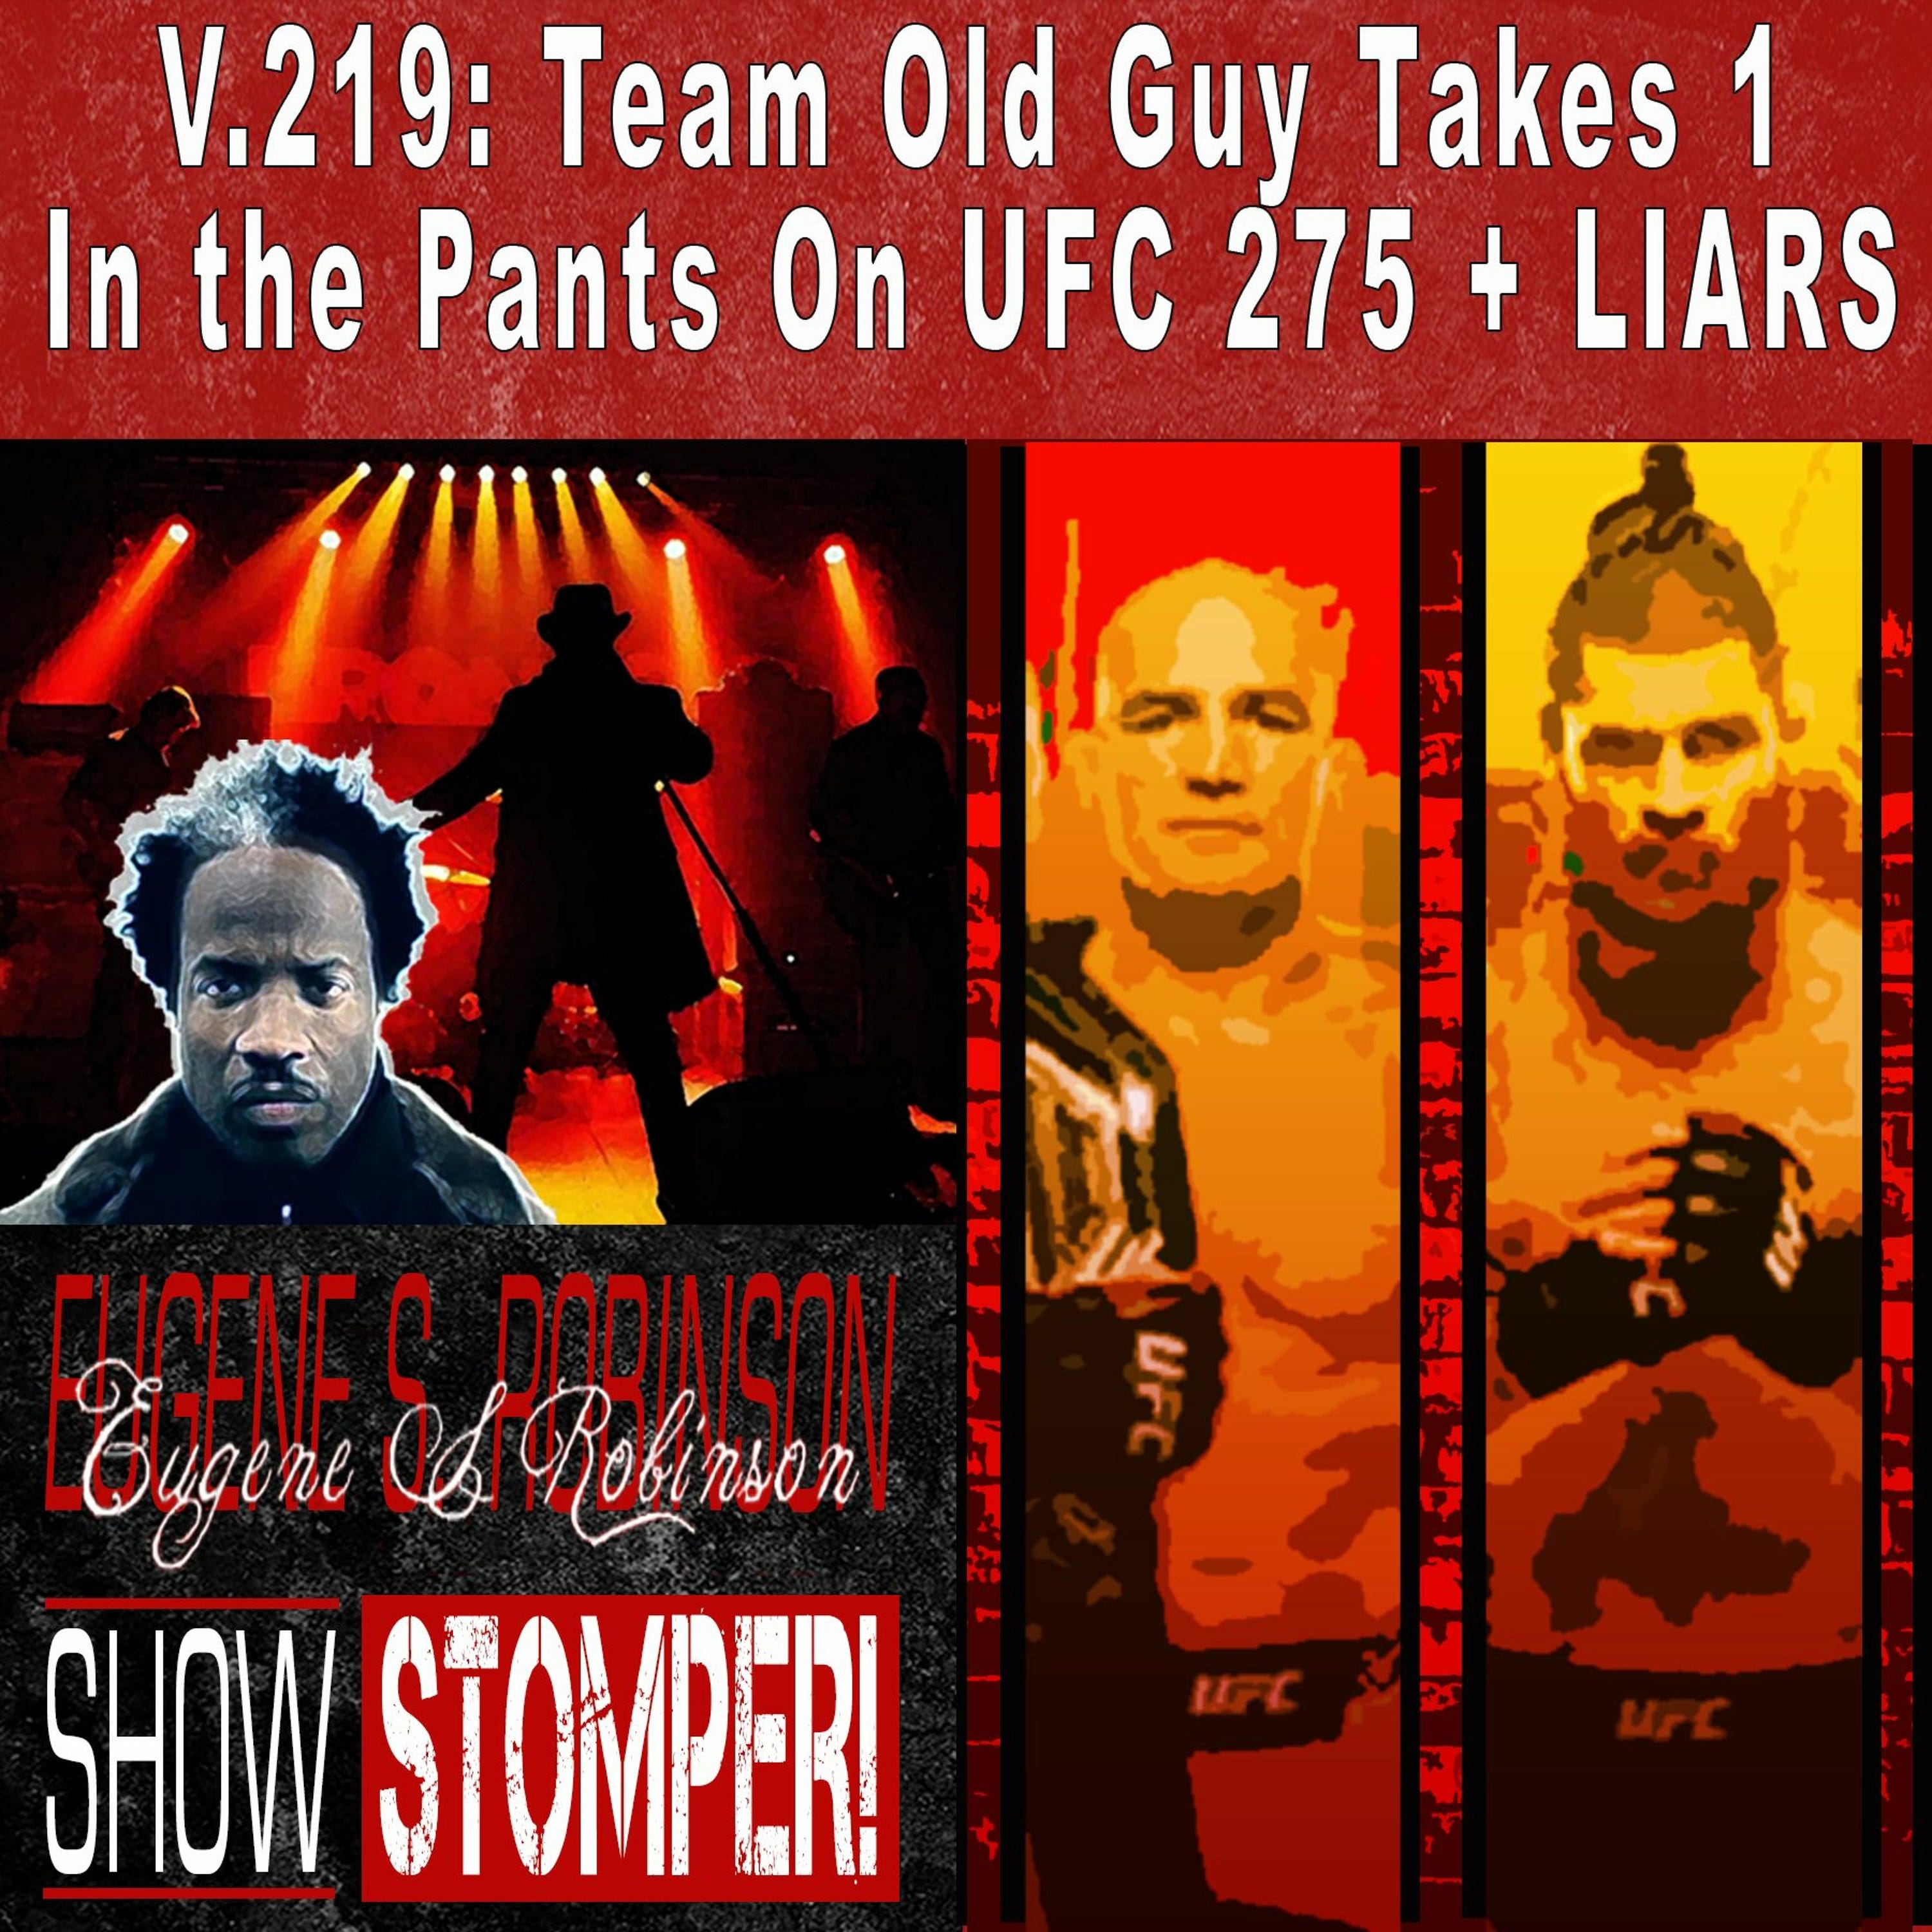 V.219: Team Old Guy Takes 1 In the Pants On UFC 275 + LIARS On The Eugene S. Robinson Show Stomper!